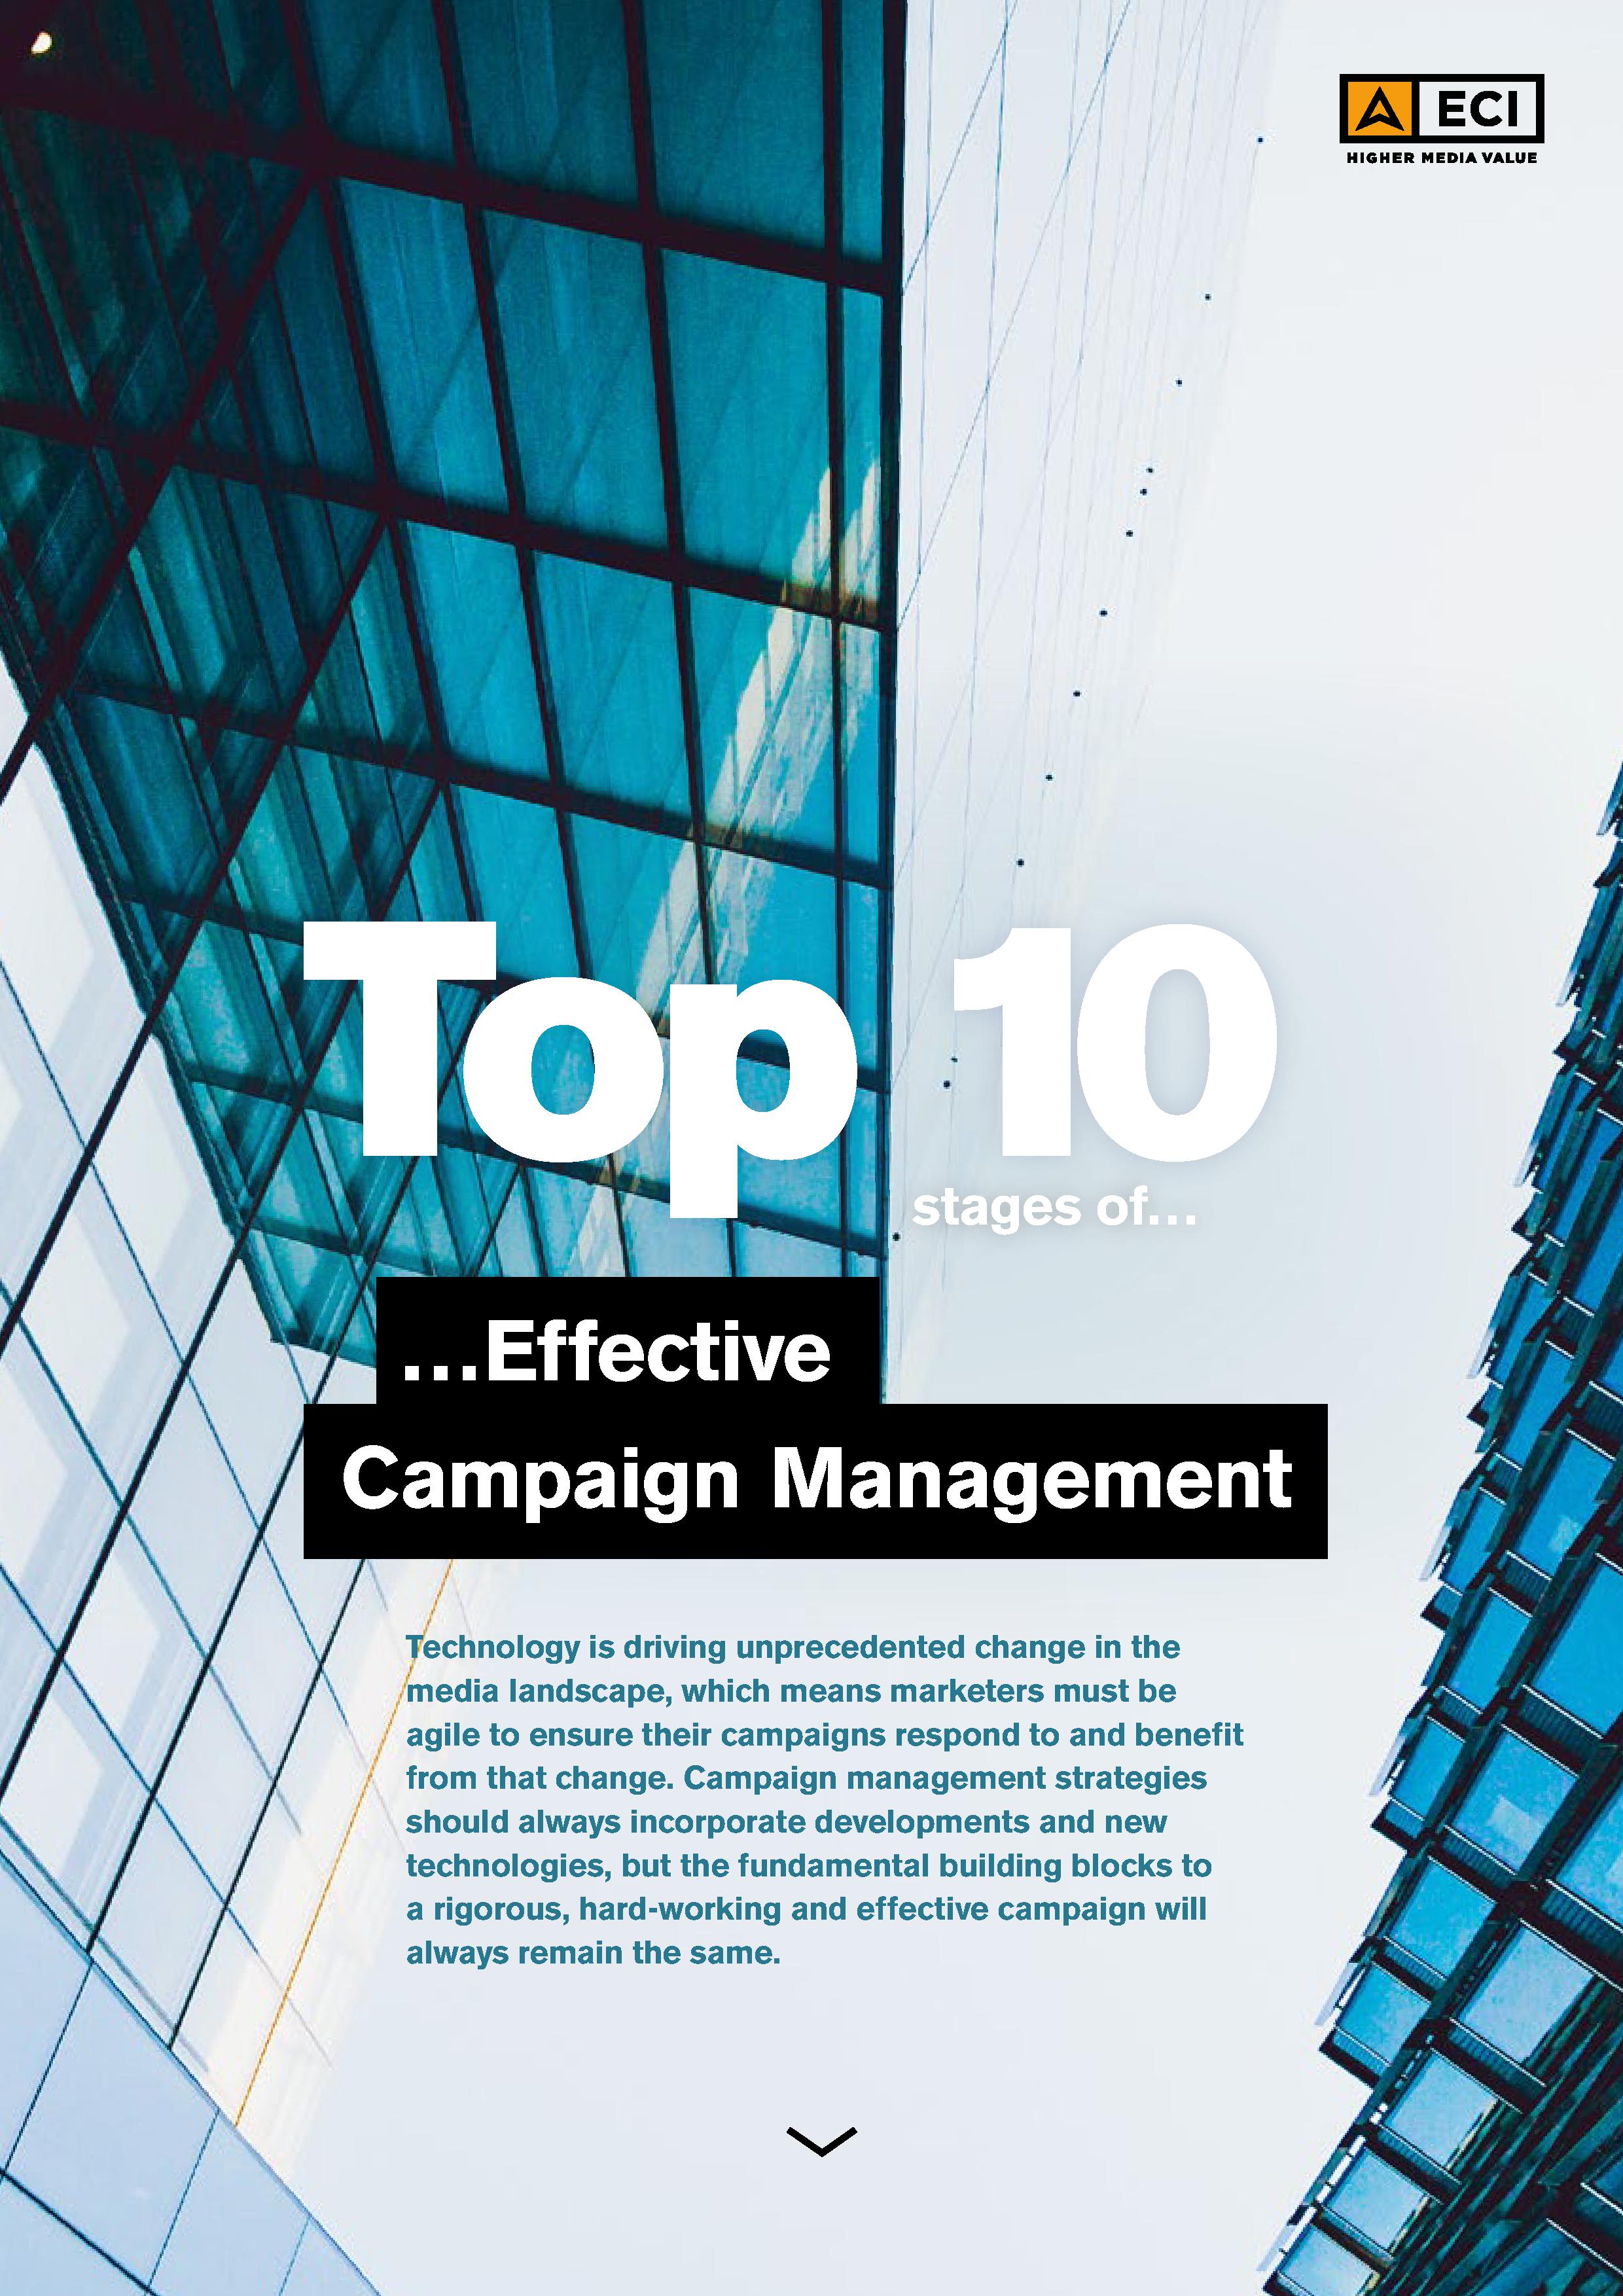 Top 10 stages of Effective Campaign Management